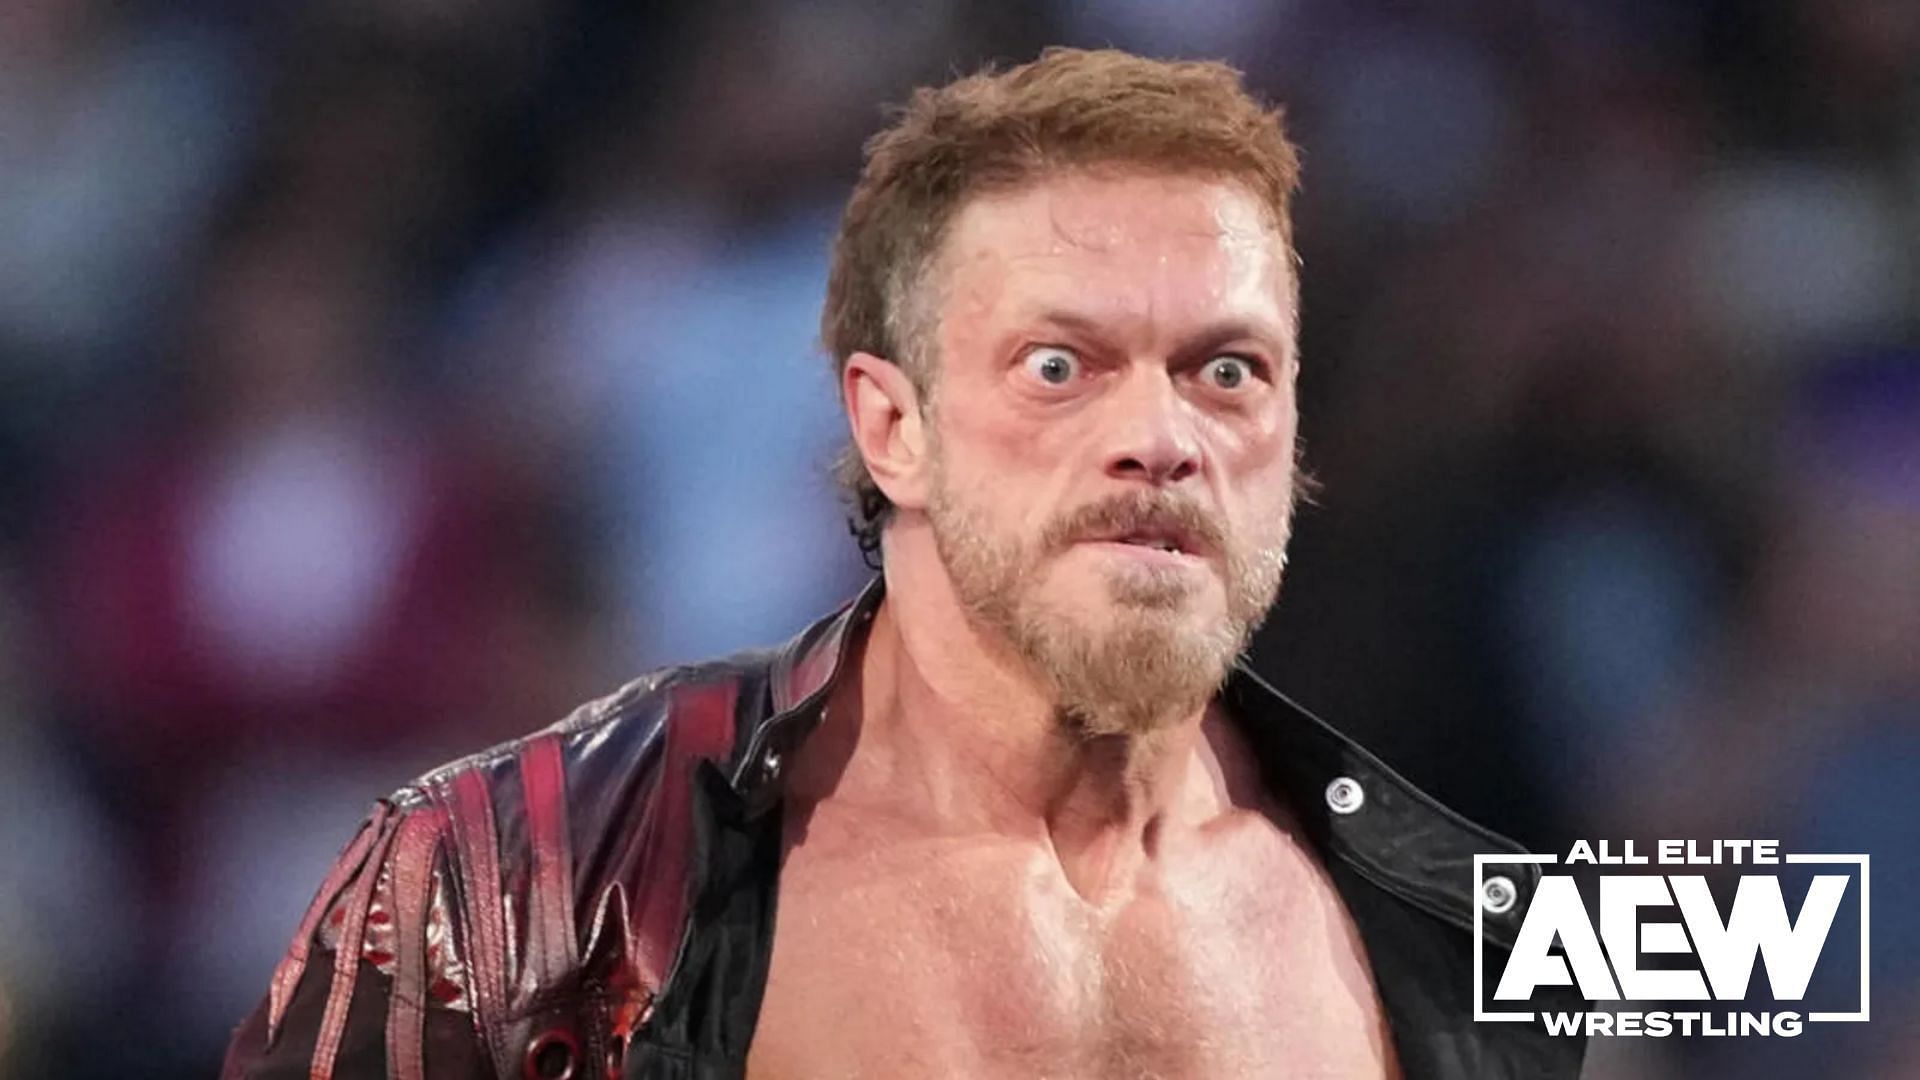 Adam Copeland debuted in AEW at Wrestledream pay-per-view